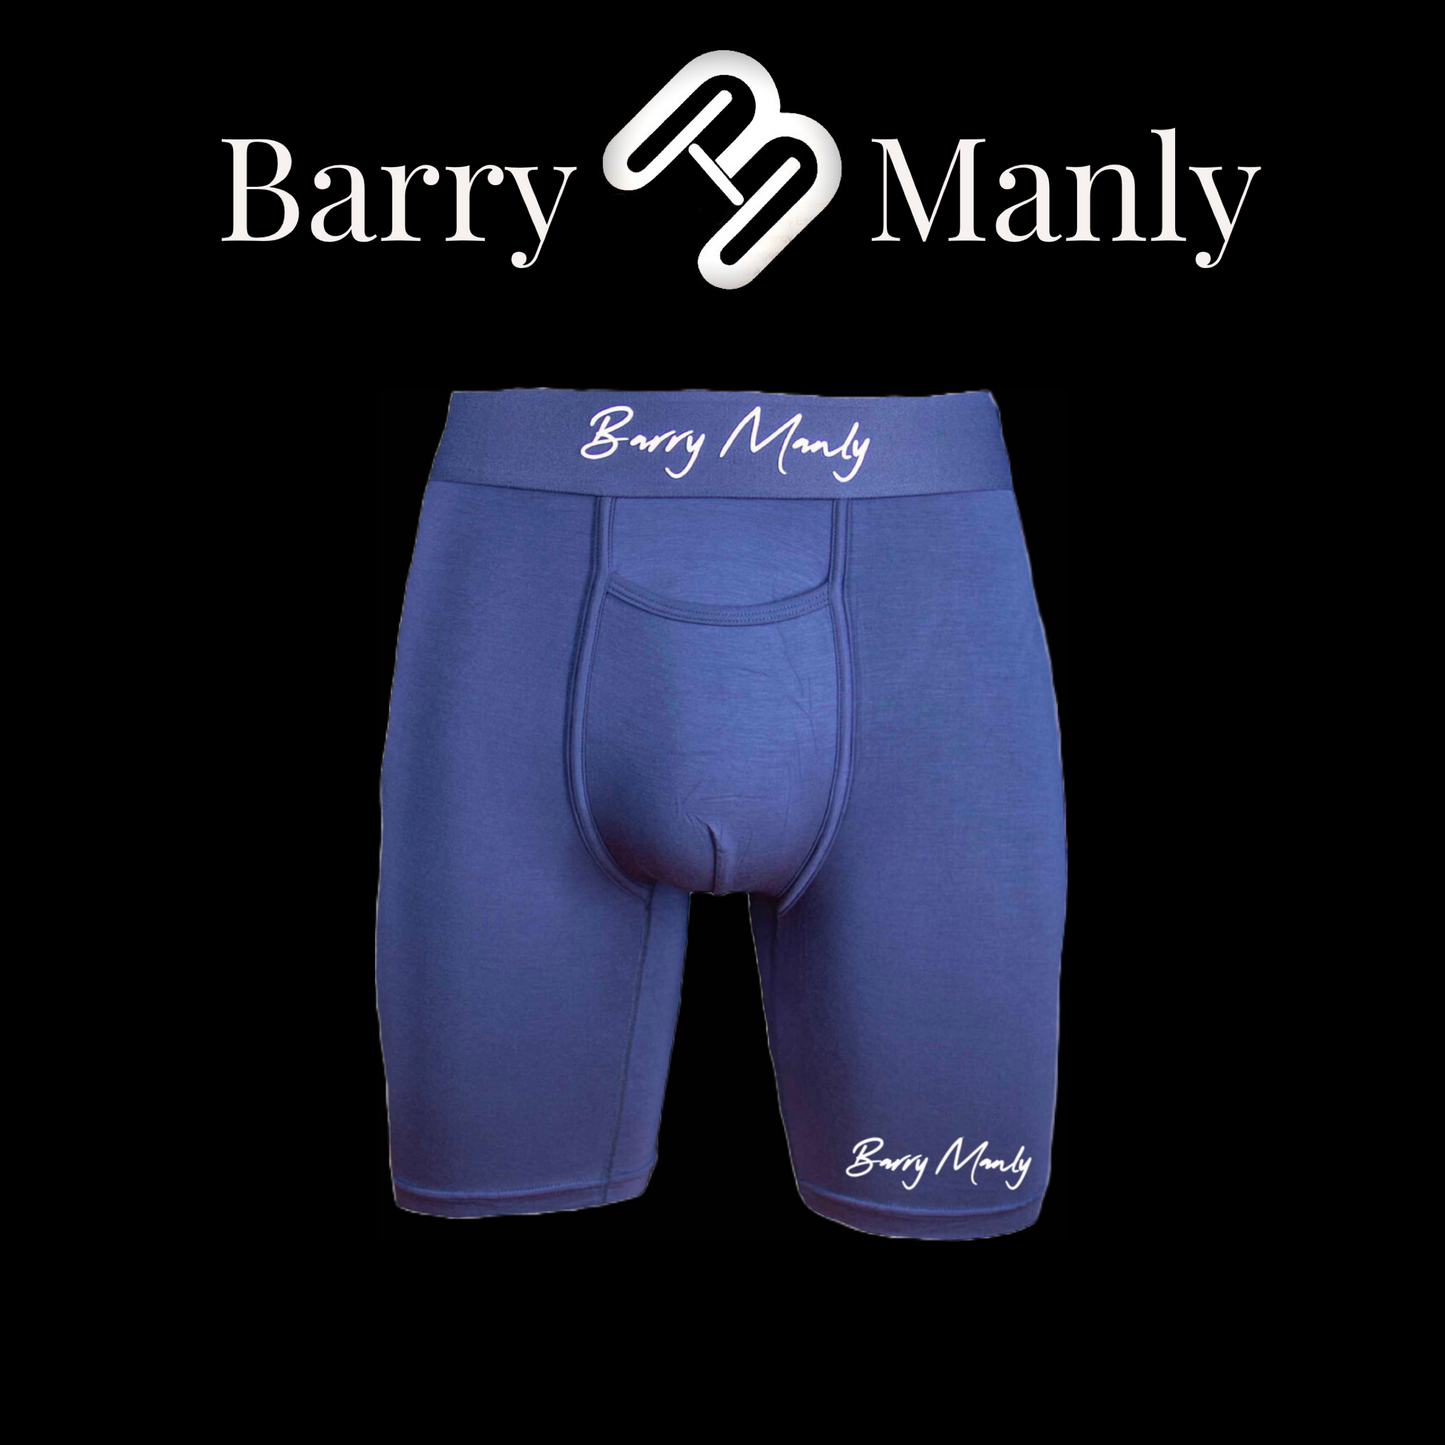 Barry Manly Boxer Brief Printed series